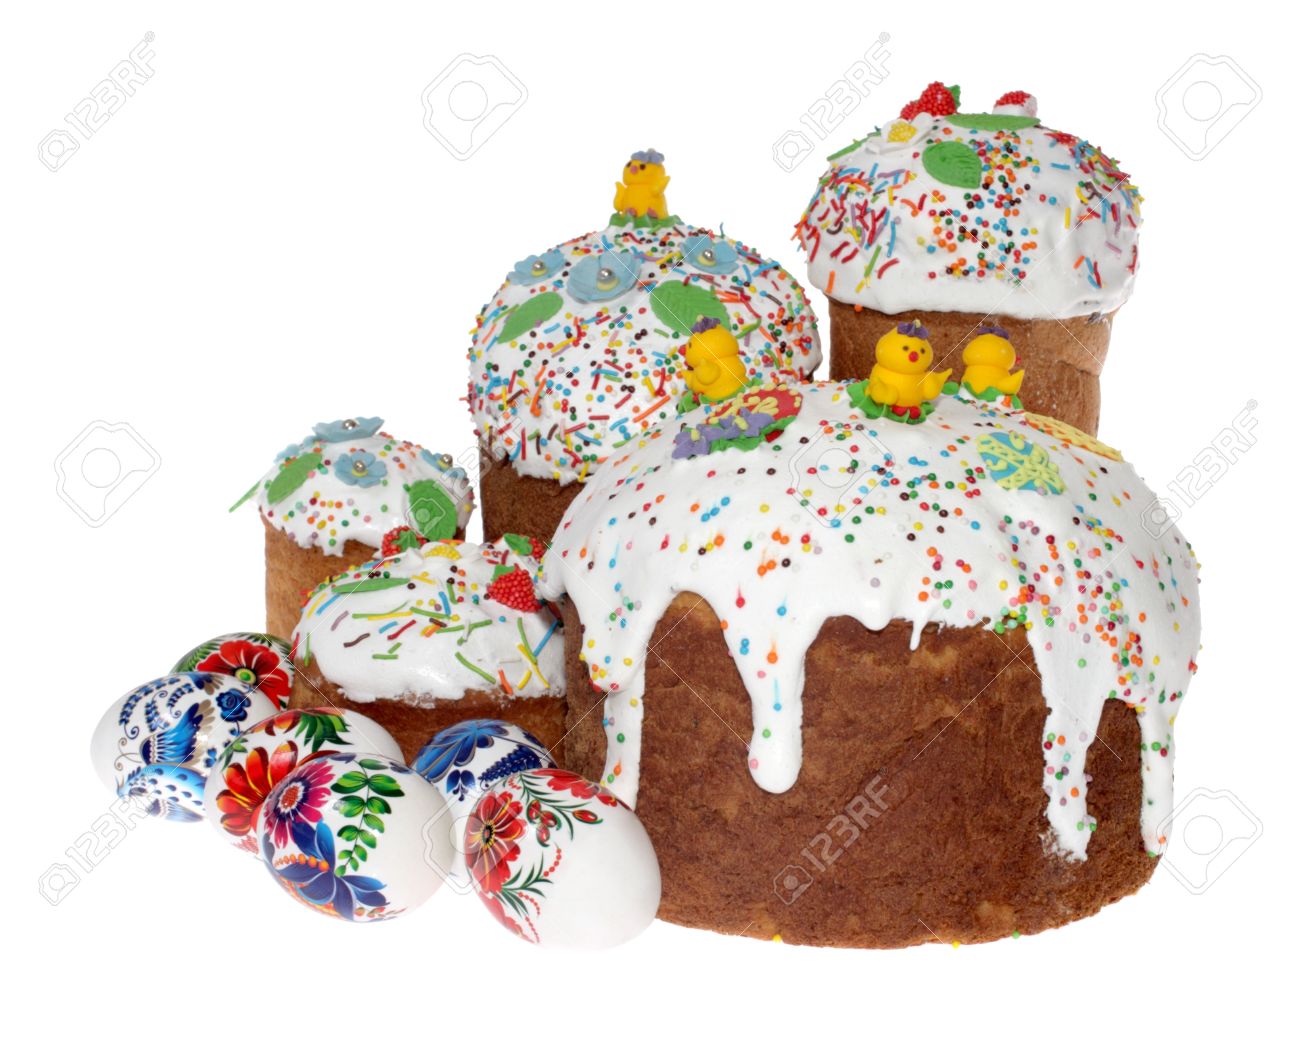 12470388-russian-easter-cake-and-colourful-easter-eggs-isolated-on-the-white-background-stock-photo